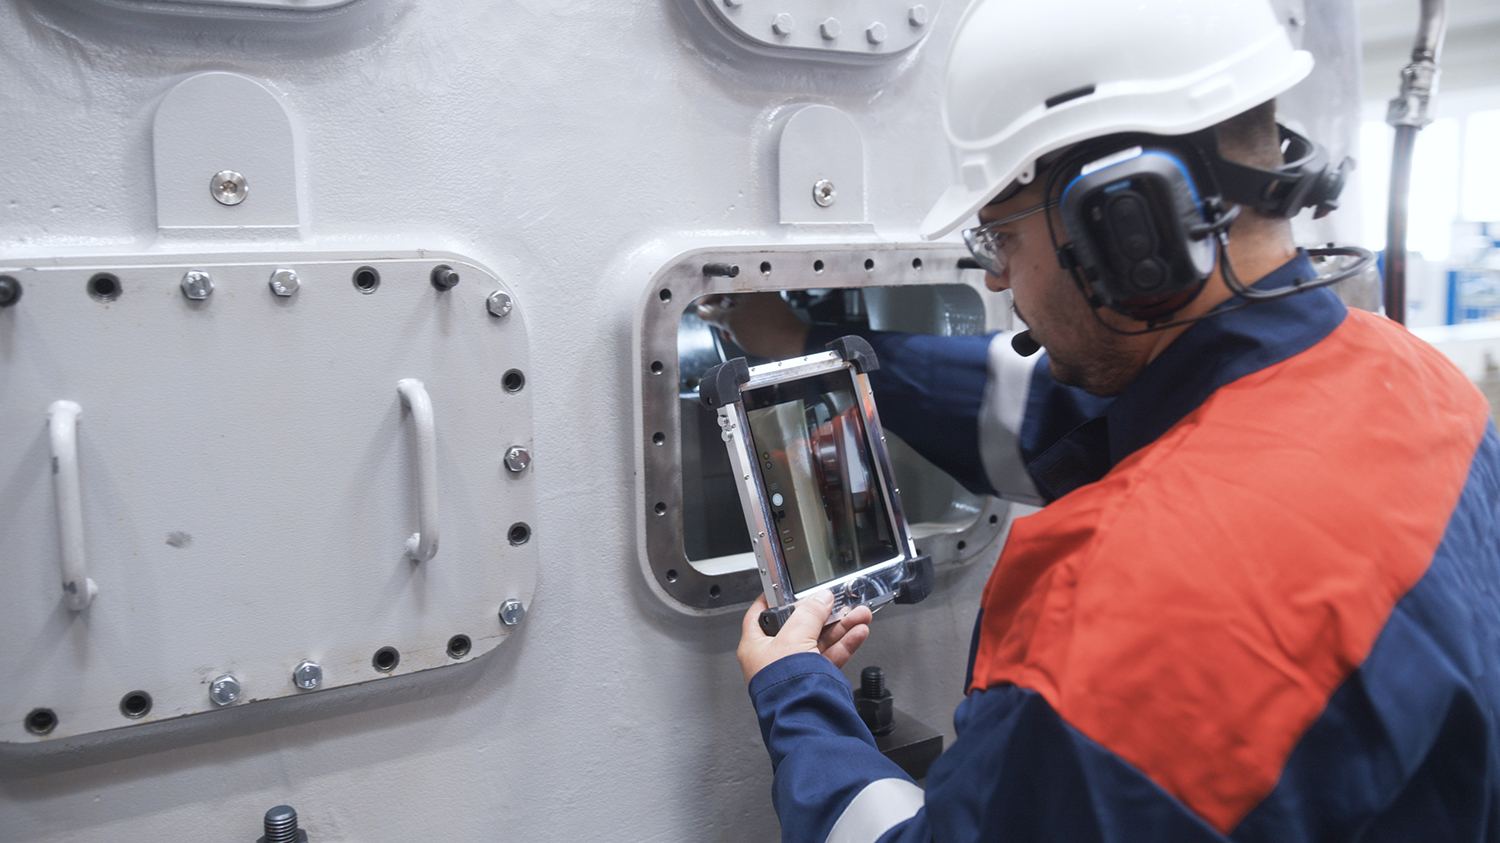 Including within the package is an ATEX-certified tablet and headset that enables the technician on-site to communicate and receive instructions via a secure network connection.